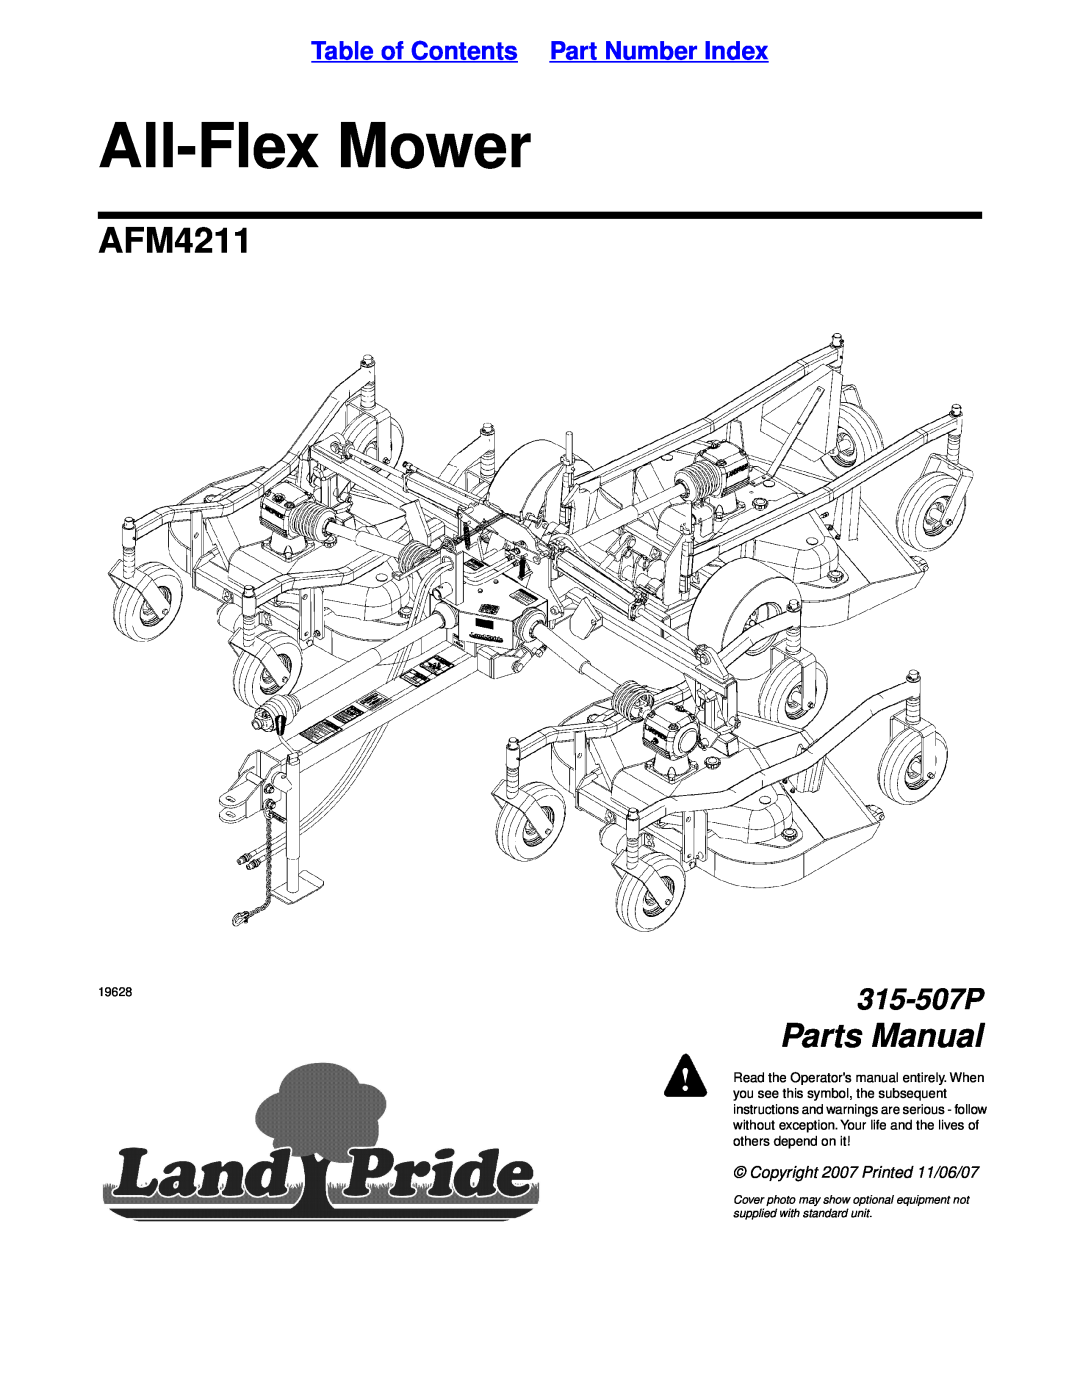 Land Pride AFM4211 manual Table of Contents, All-Flex Mowers, Operator’s Manual, 315-507M, 11/14/08, others depend on it 